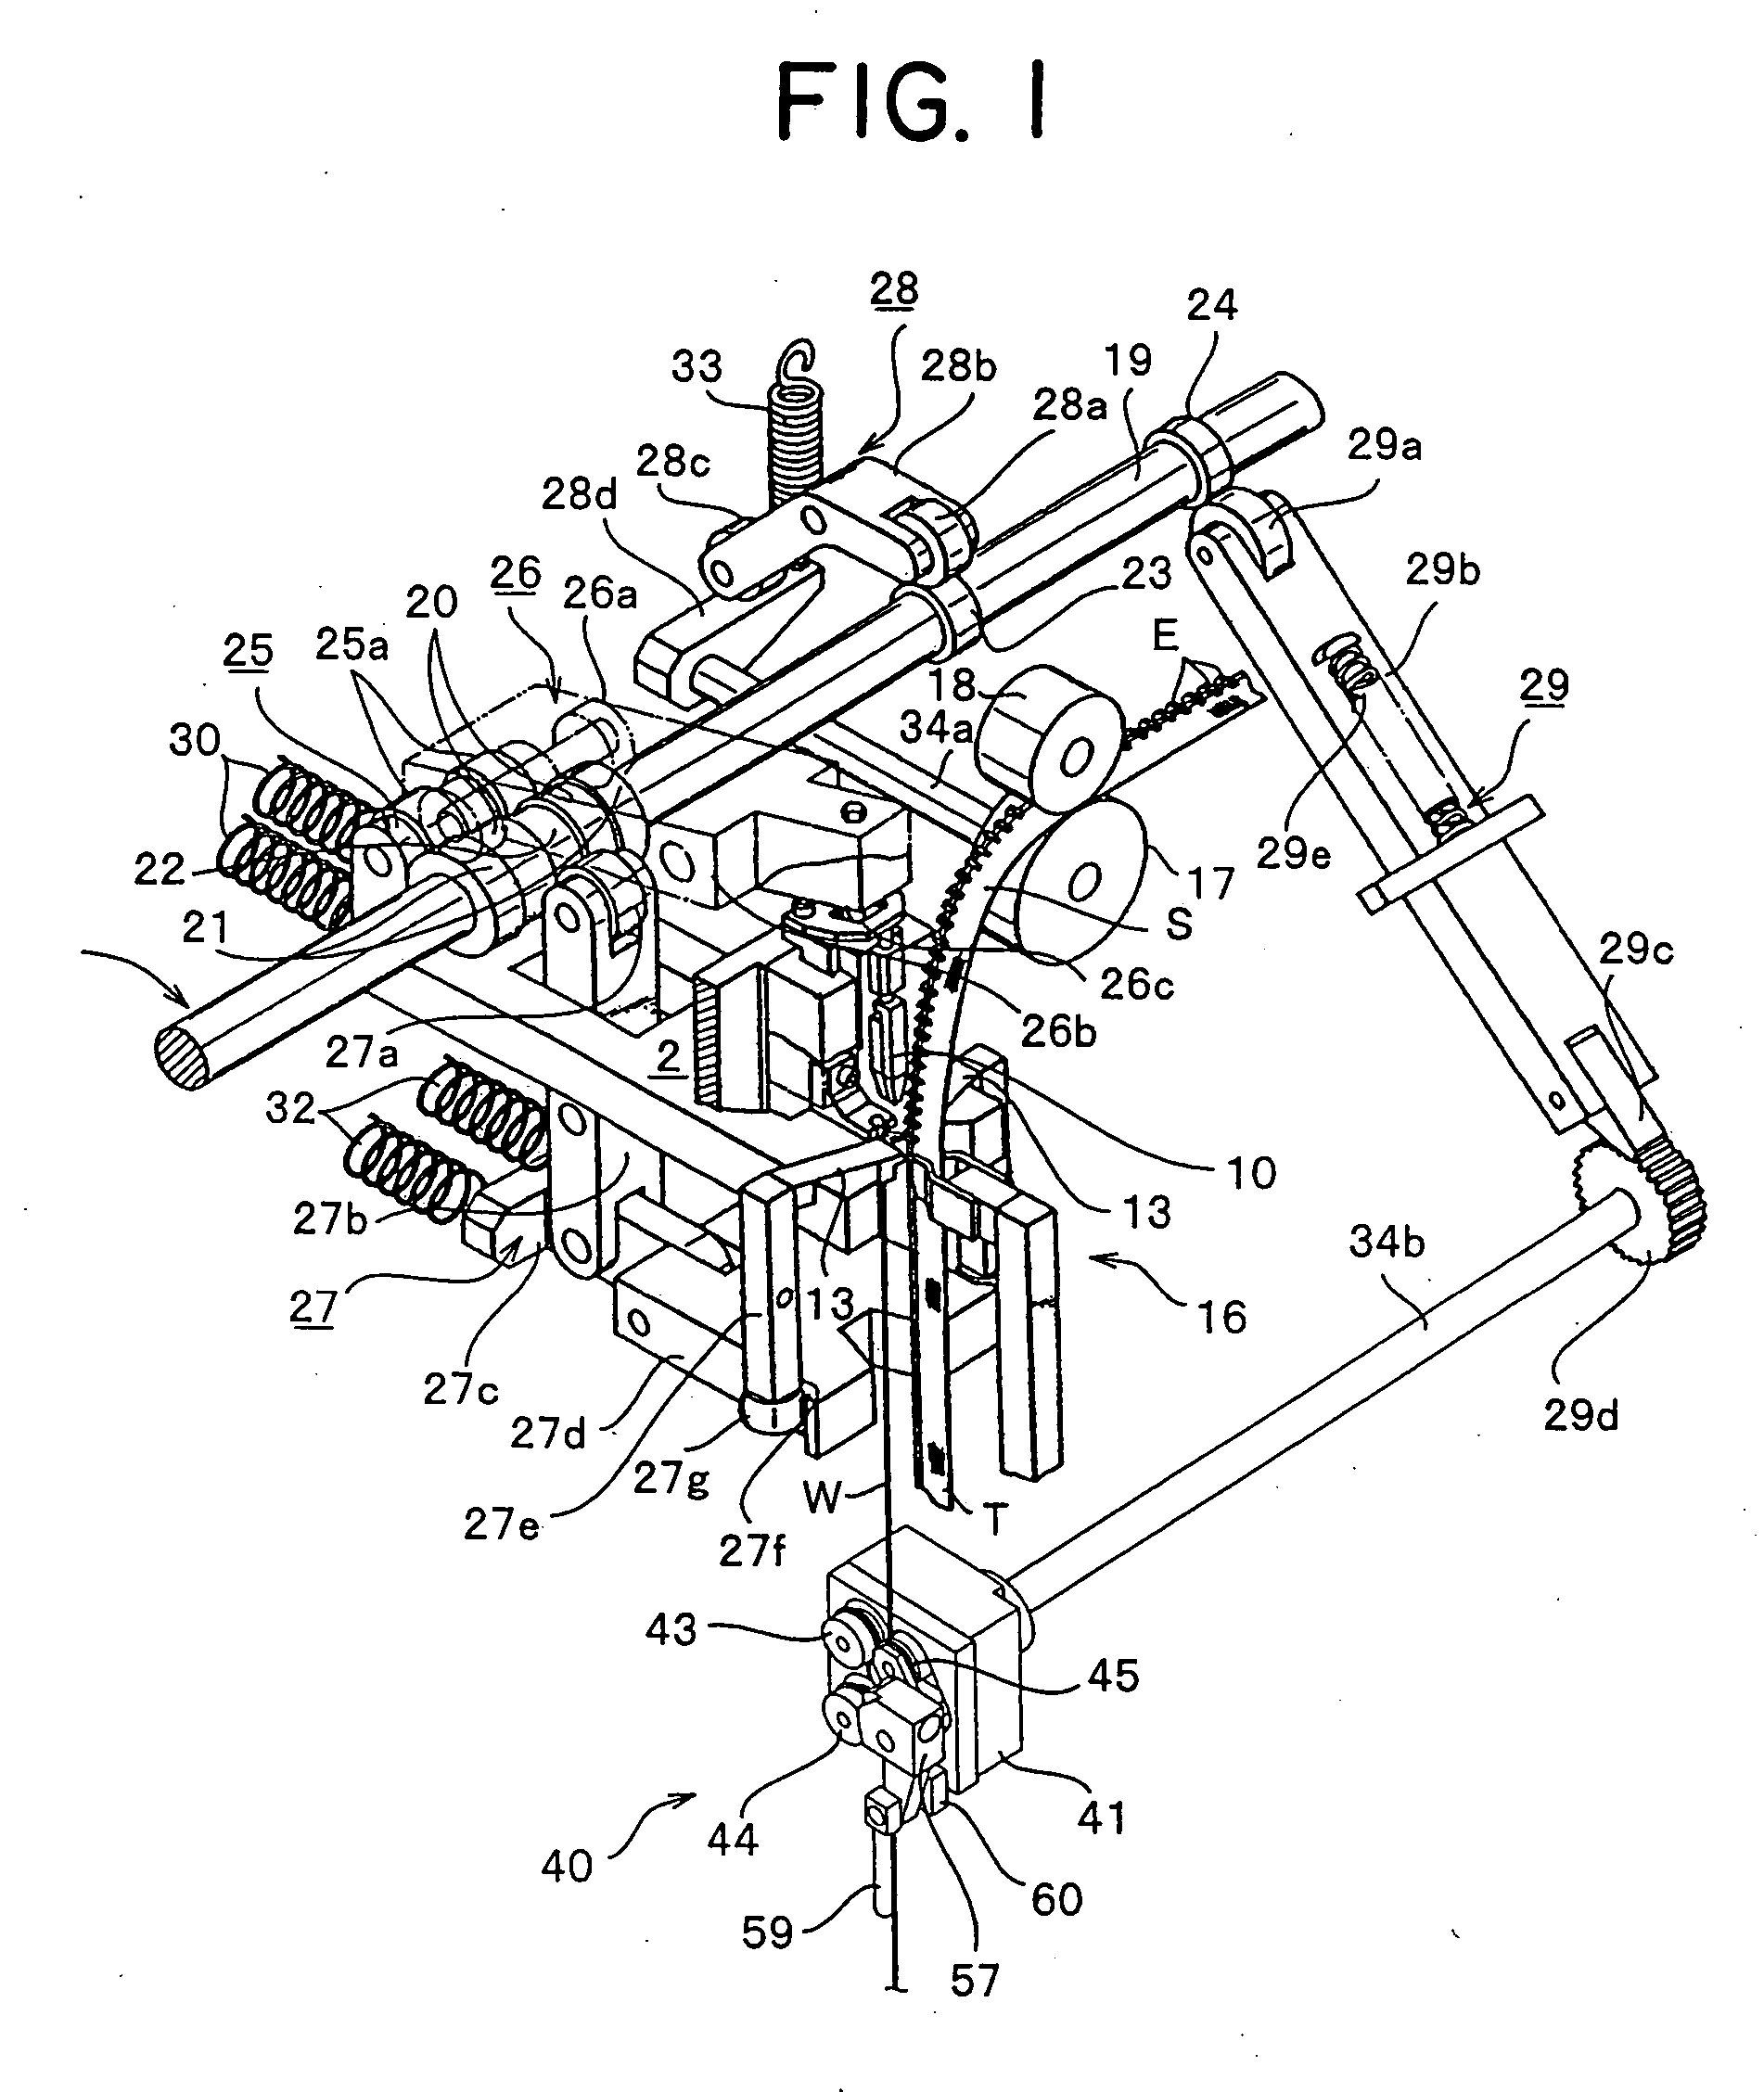 Feeding unit for engaging element metallic linear material in continuous manufacturing apparatus for fastener stringer